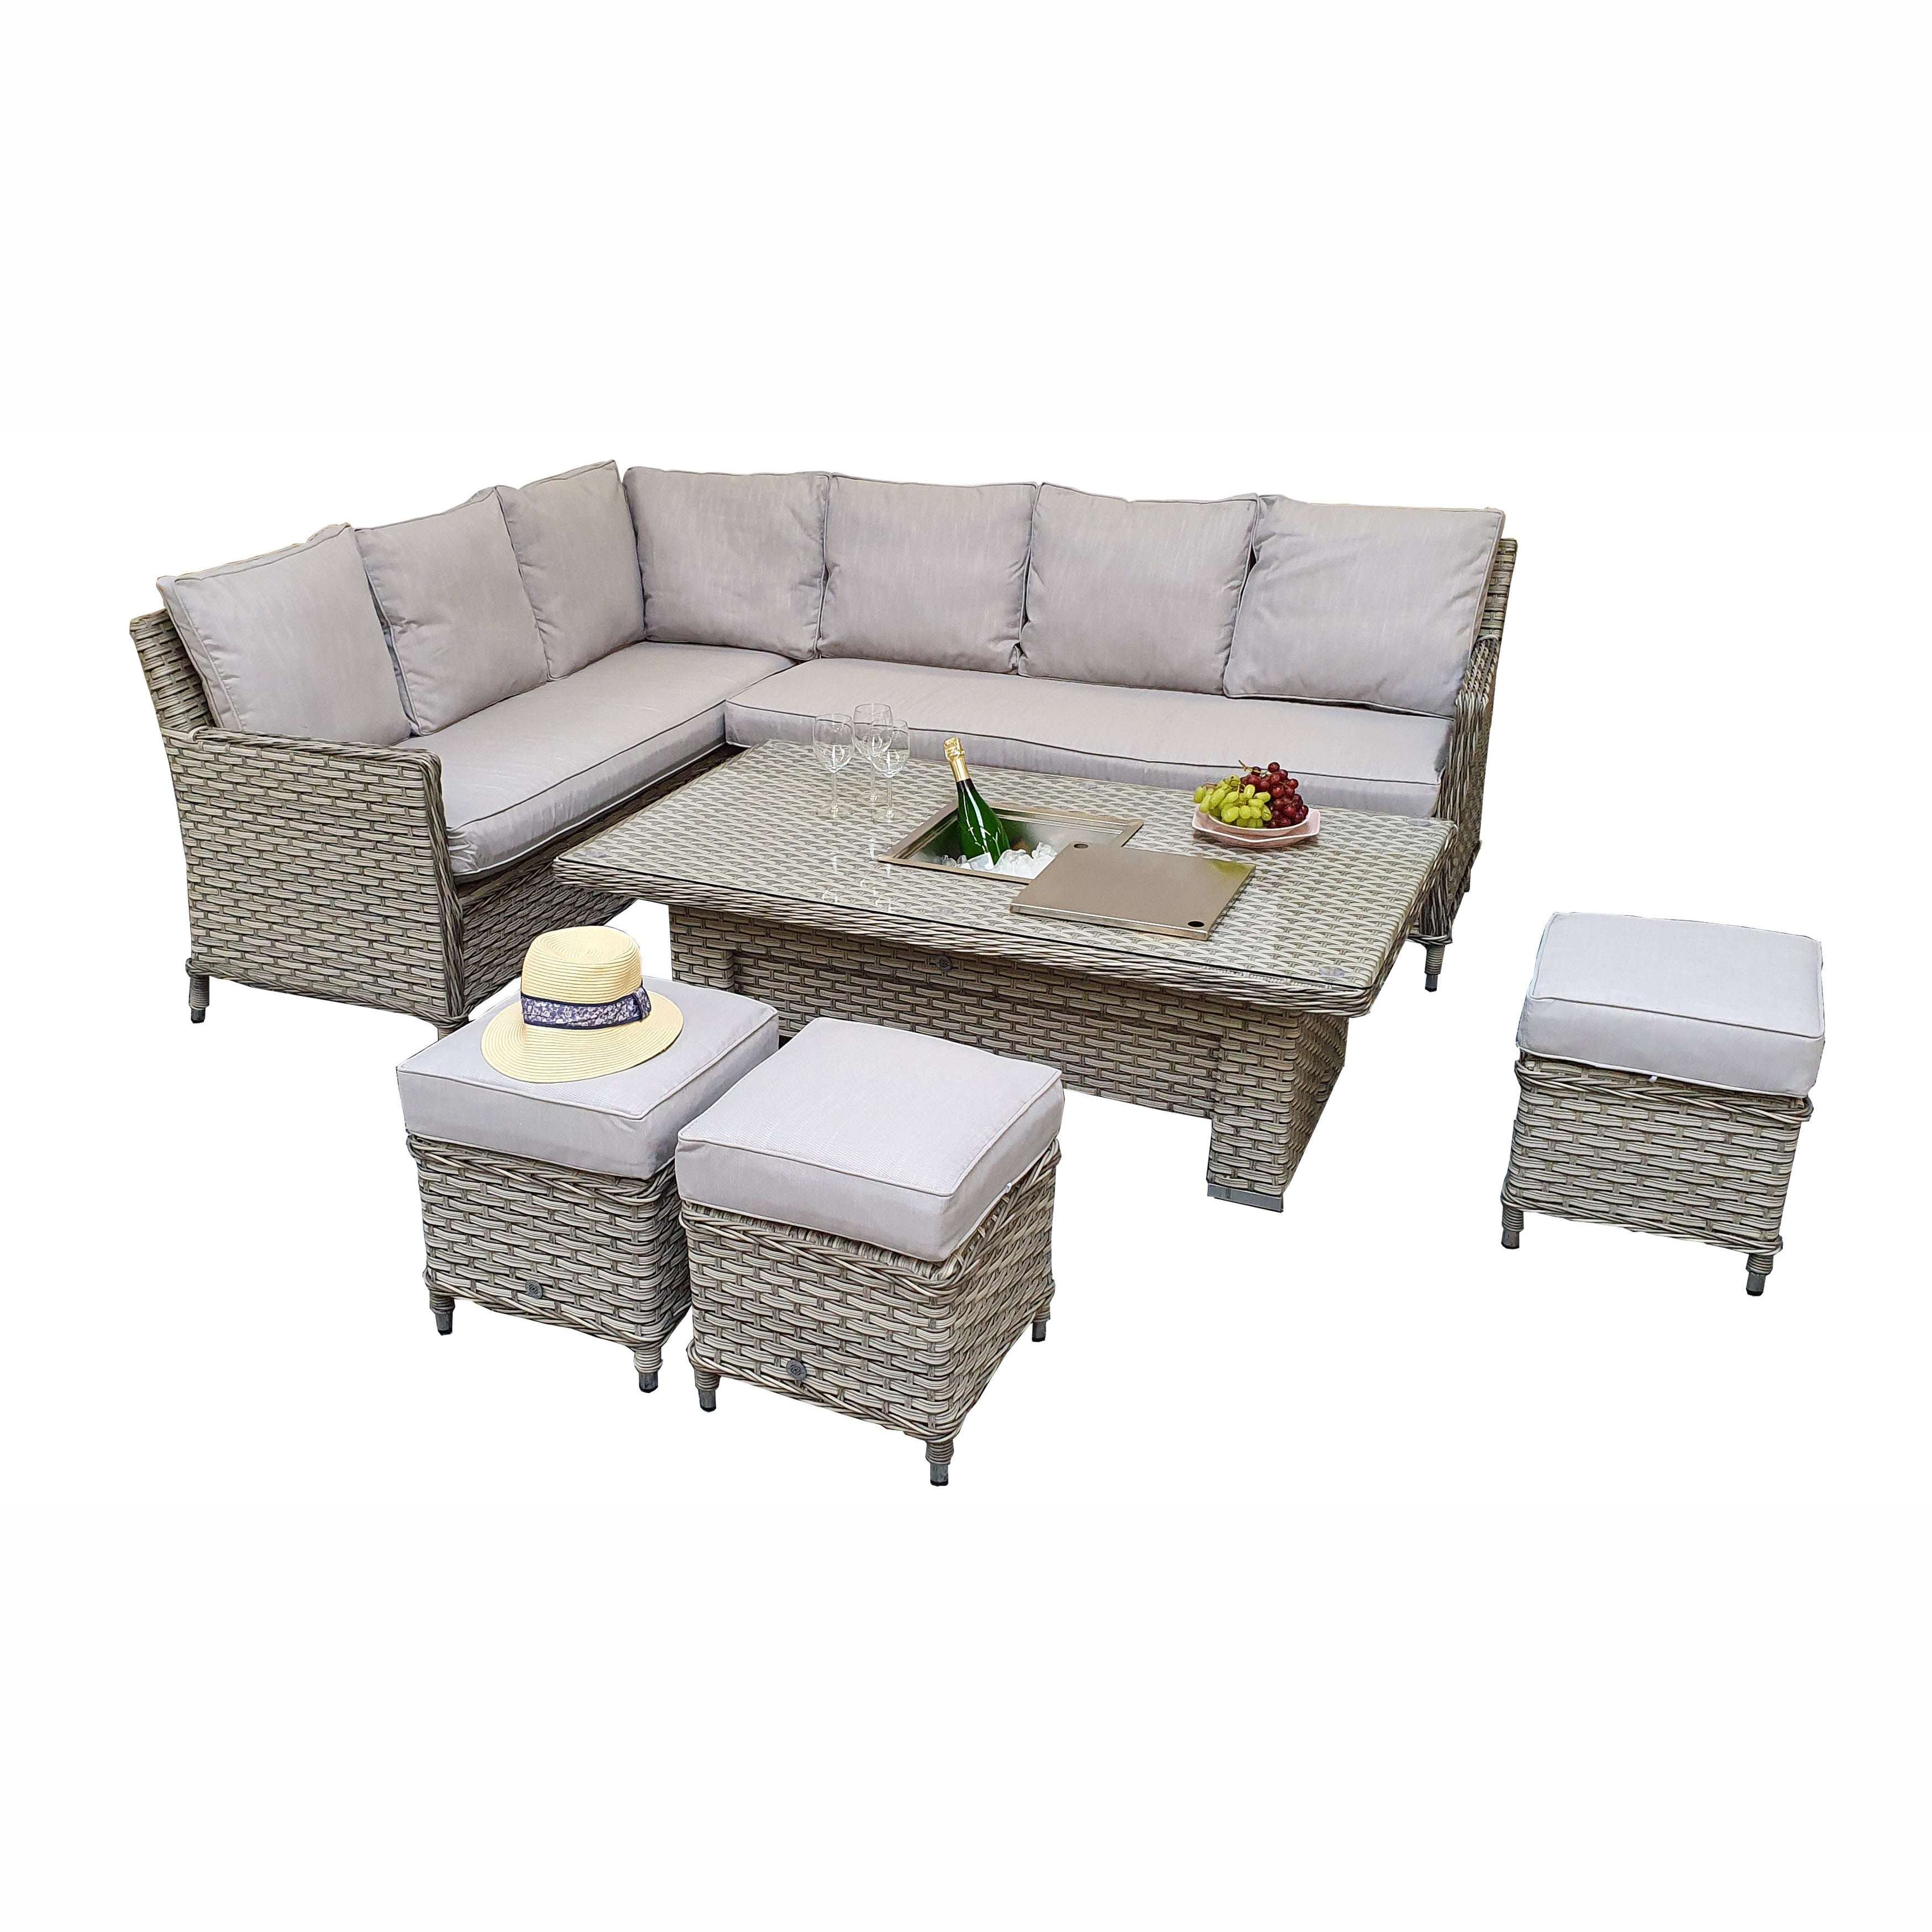 Exceptional Garden:Signature Weave Edwina Corner Dining Set with Lift Table and Ice bucket- 3 Special Wicker Grey